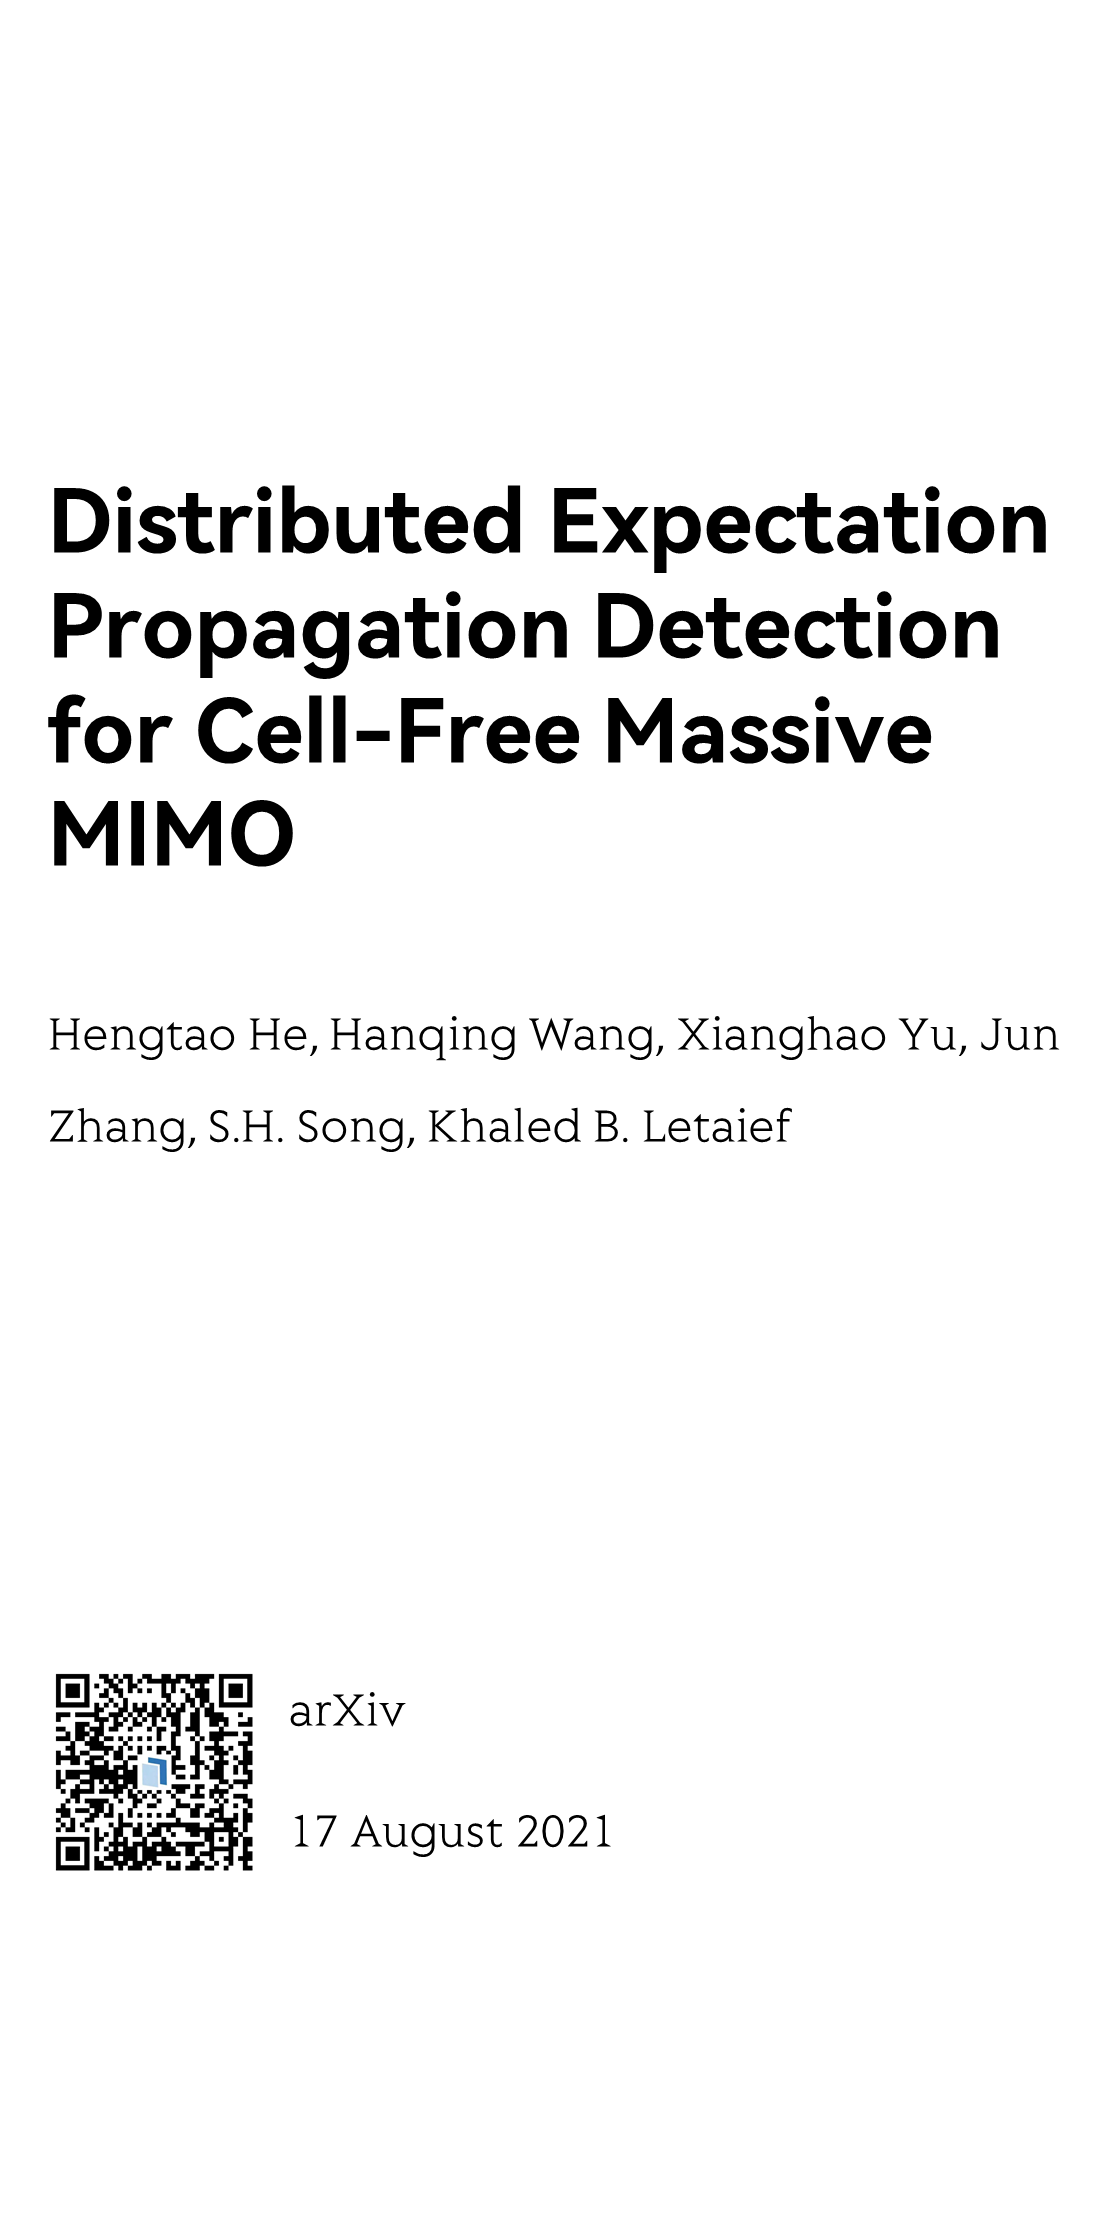 Distributed Expectation Propagation Detection for Cell-Free Massive MIMO_1